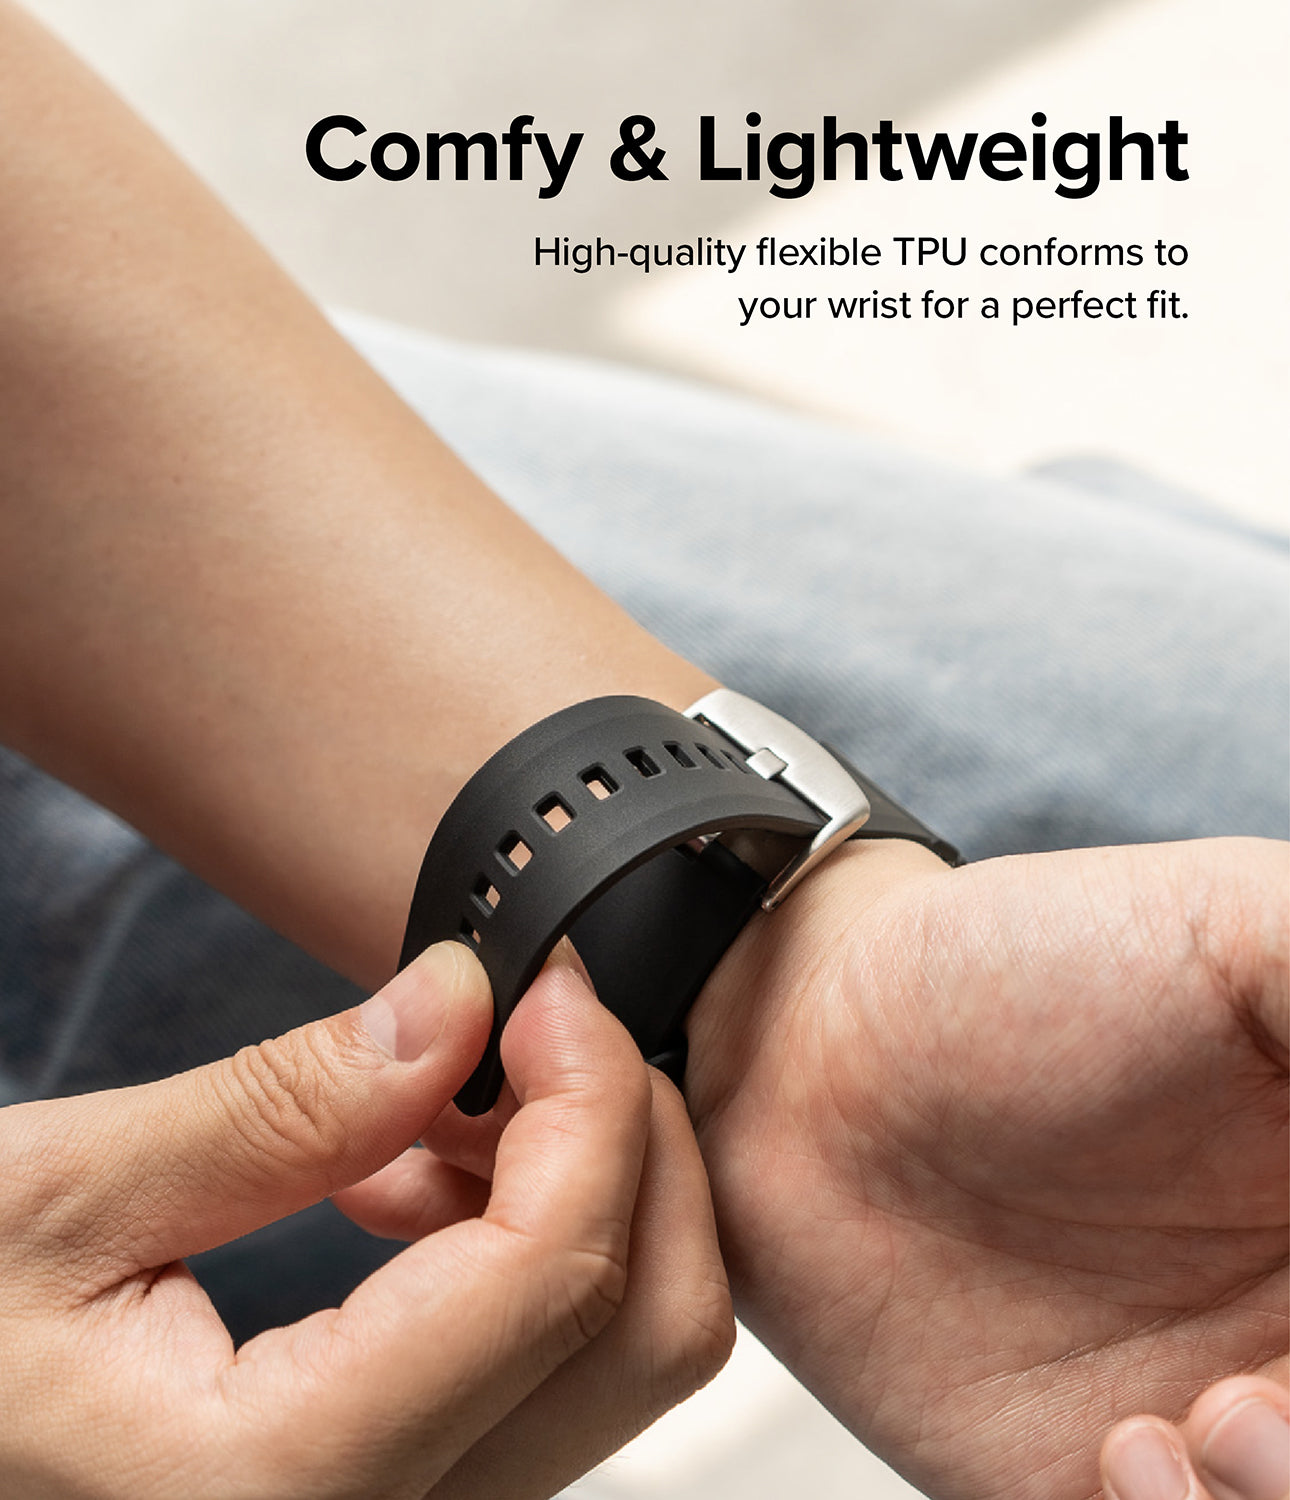 High-quality flexible TPU conforms to your wrist for a perfect fit